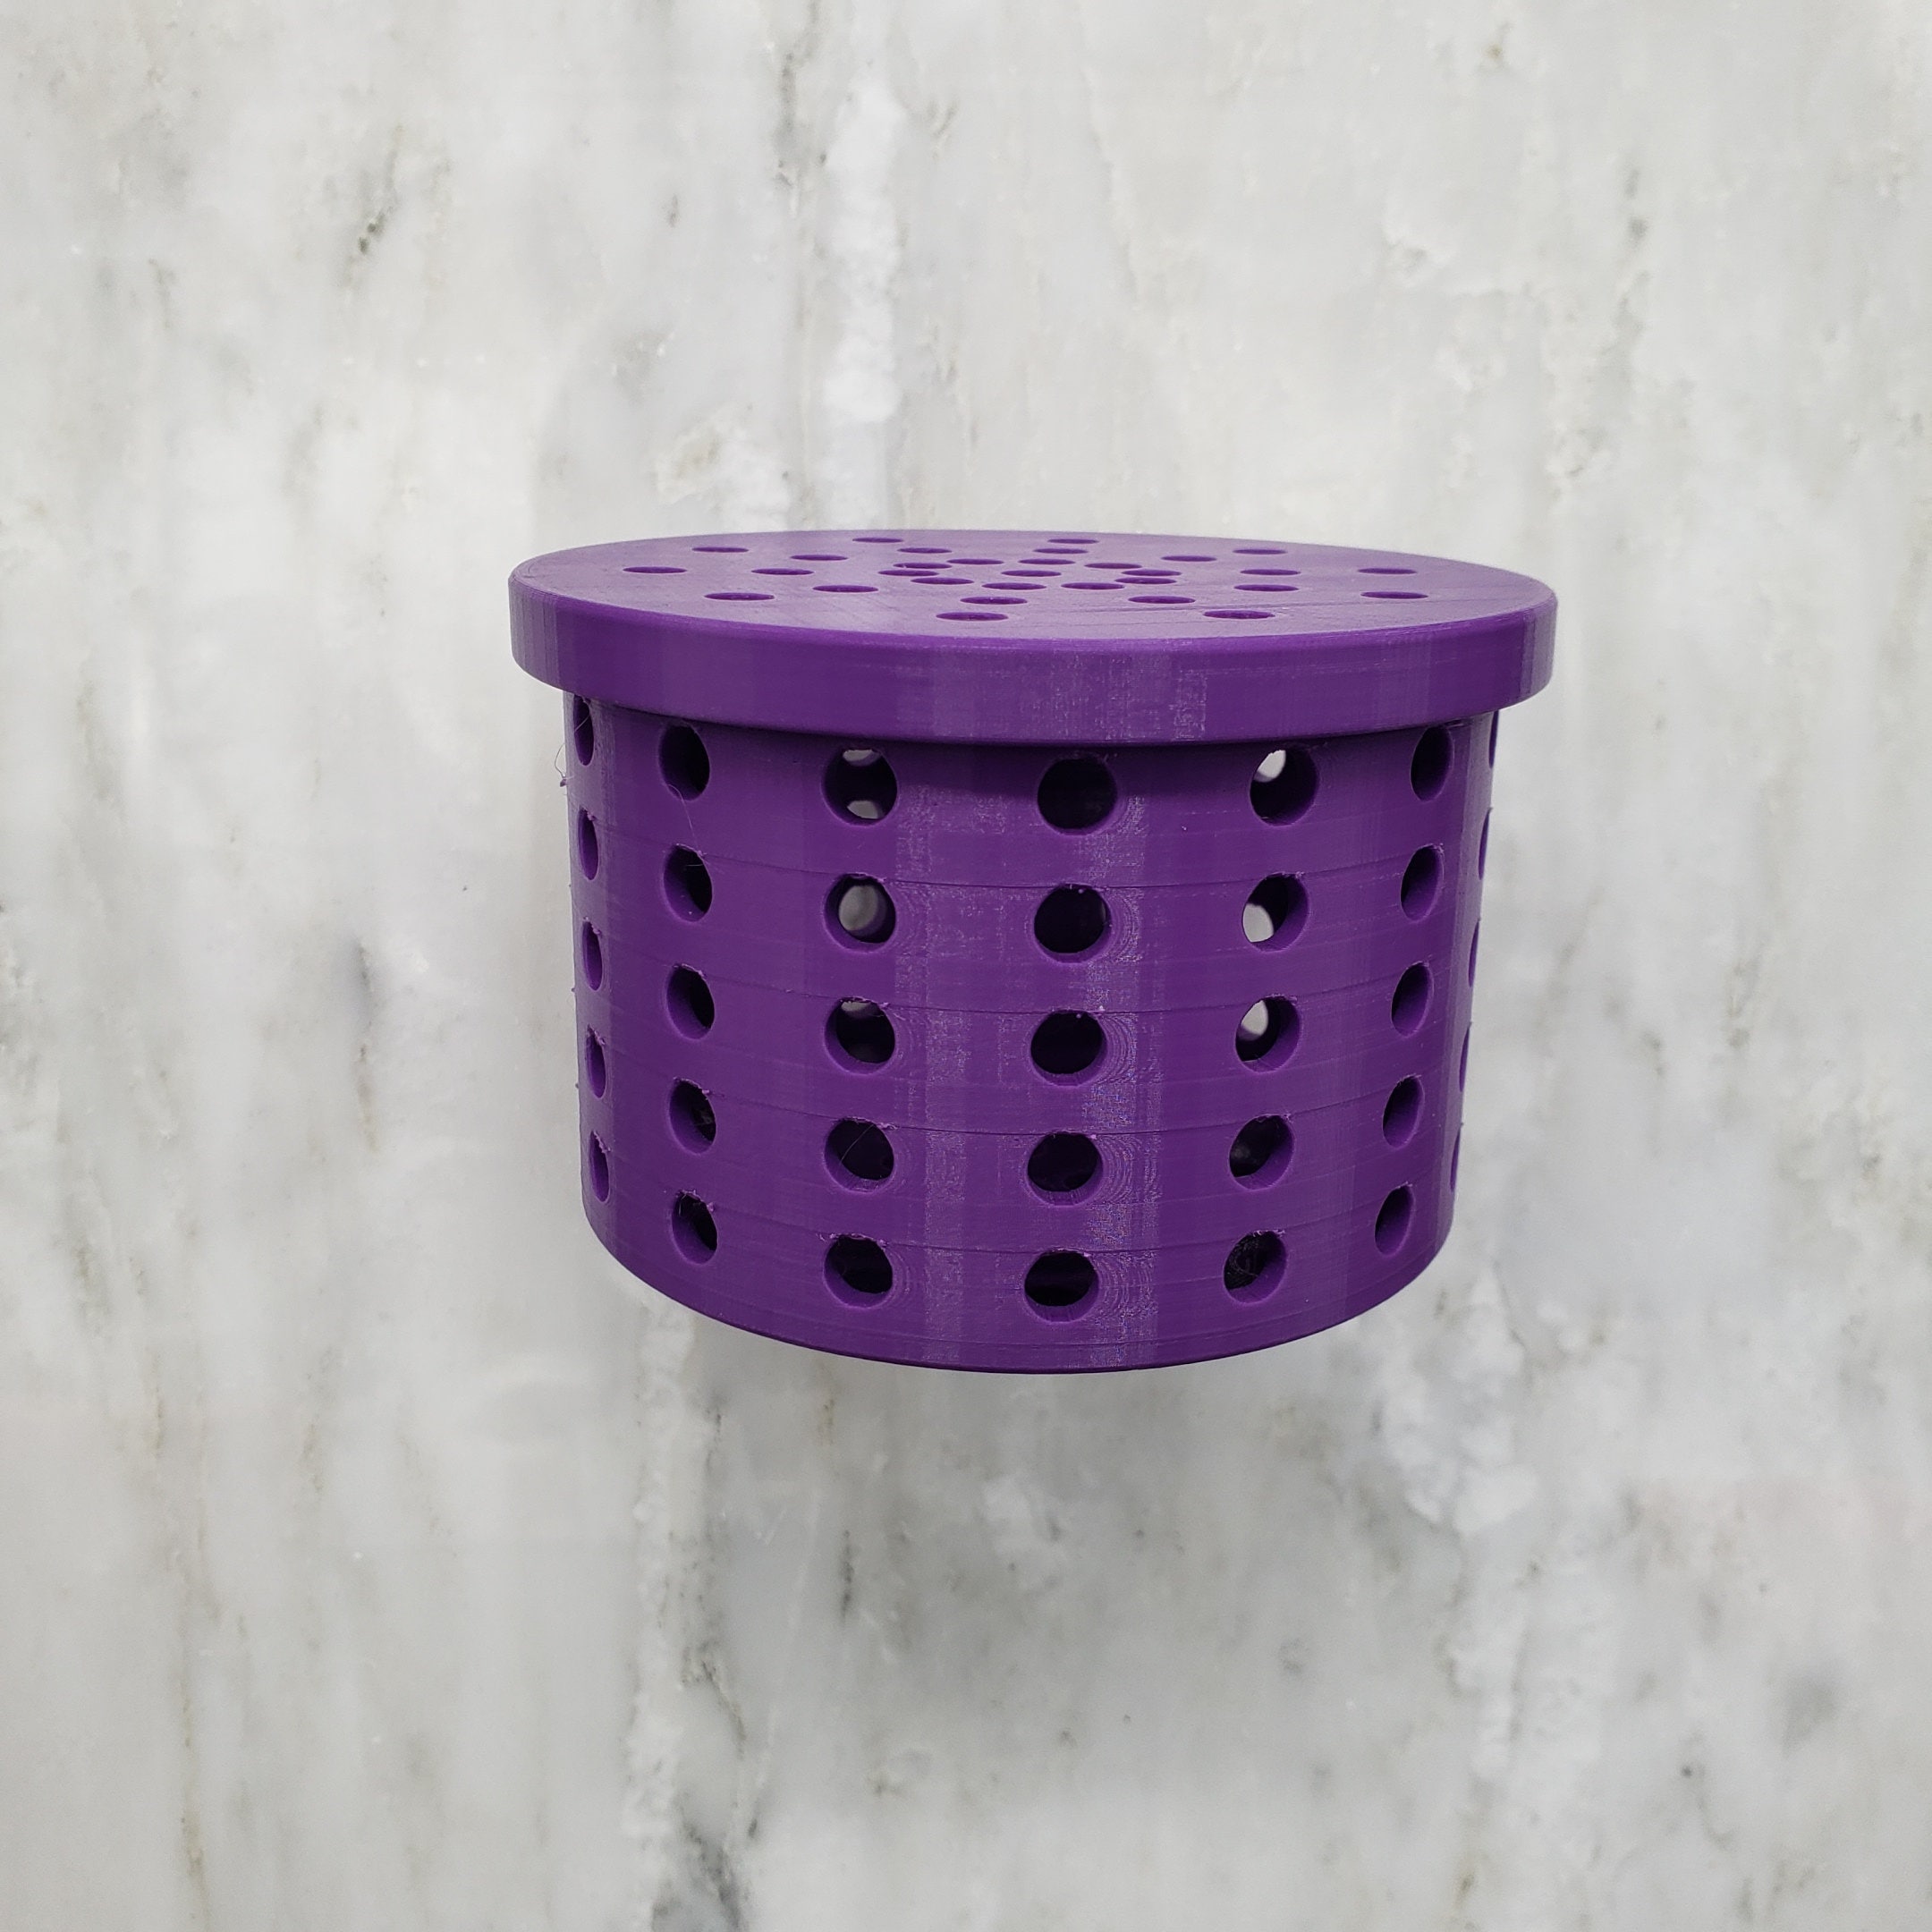 Large Shower Steamer Holder Basket With Suction Cup, Shower Steamer Basket,  Can Fit up to a 3 Inch Round Shower Steamer, Customizable Color 